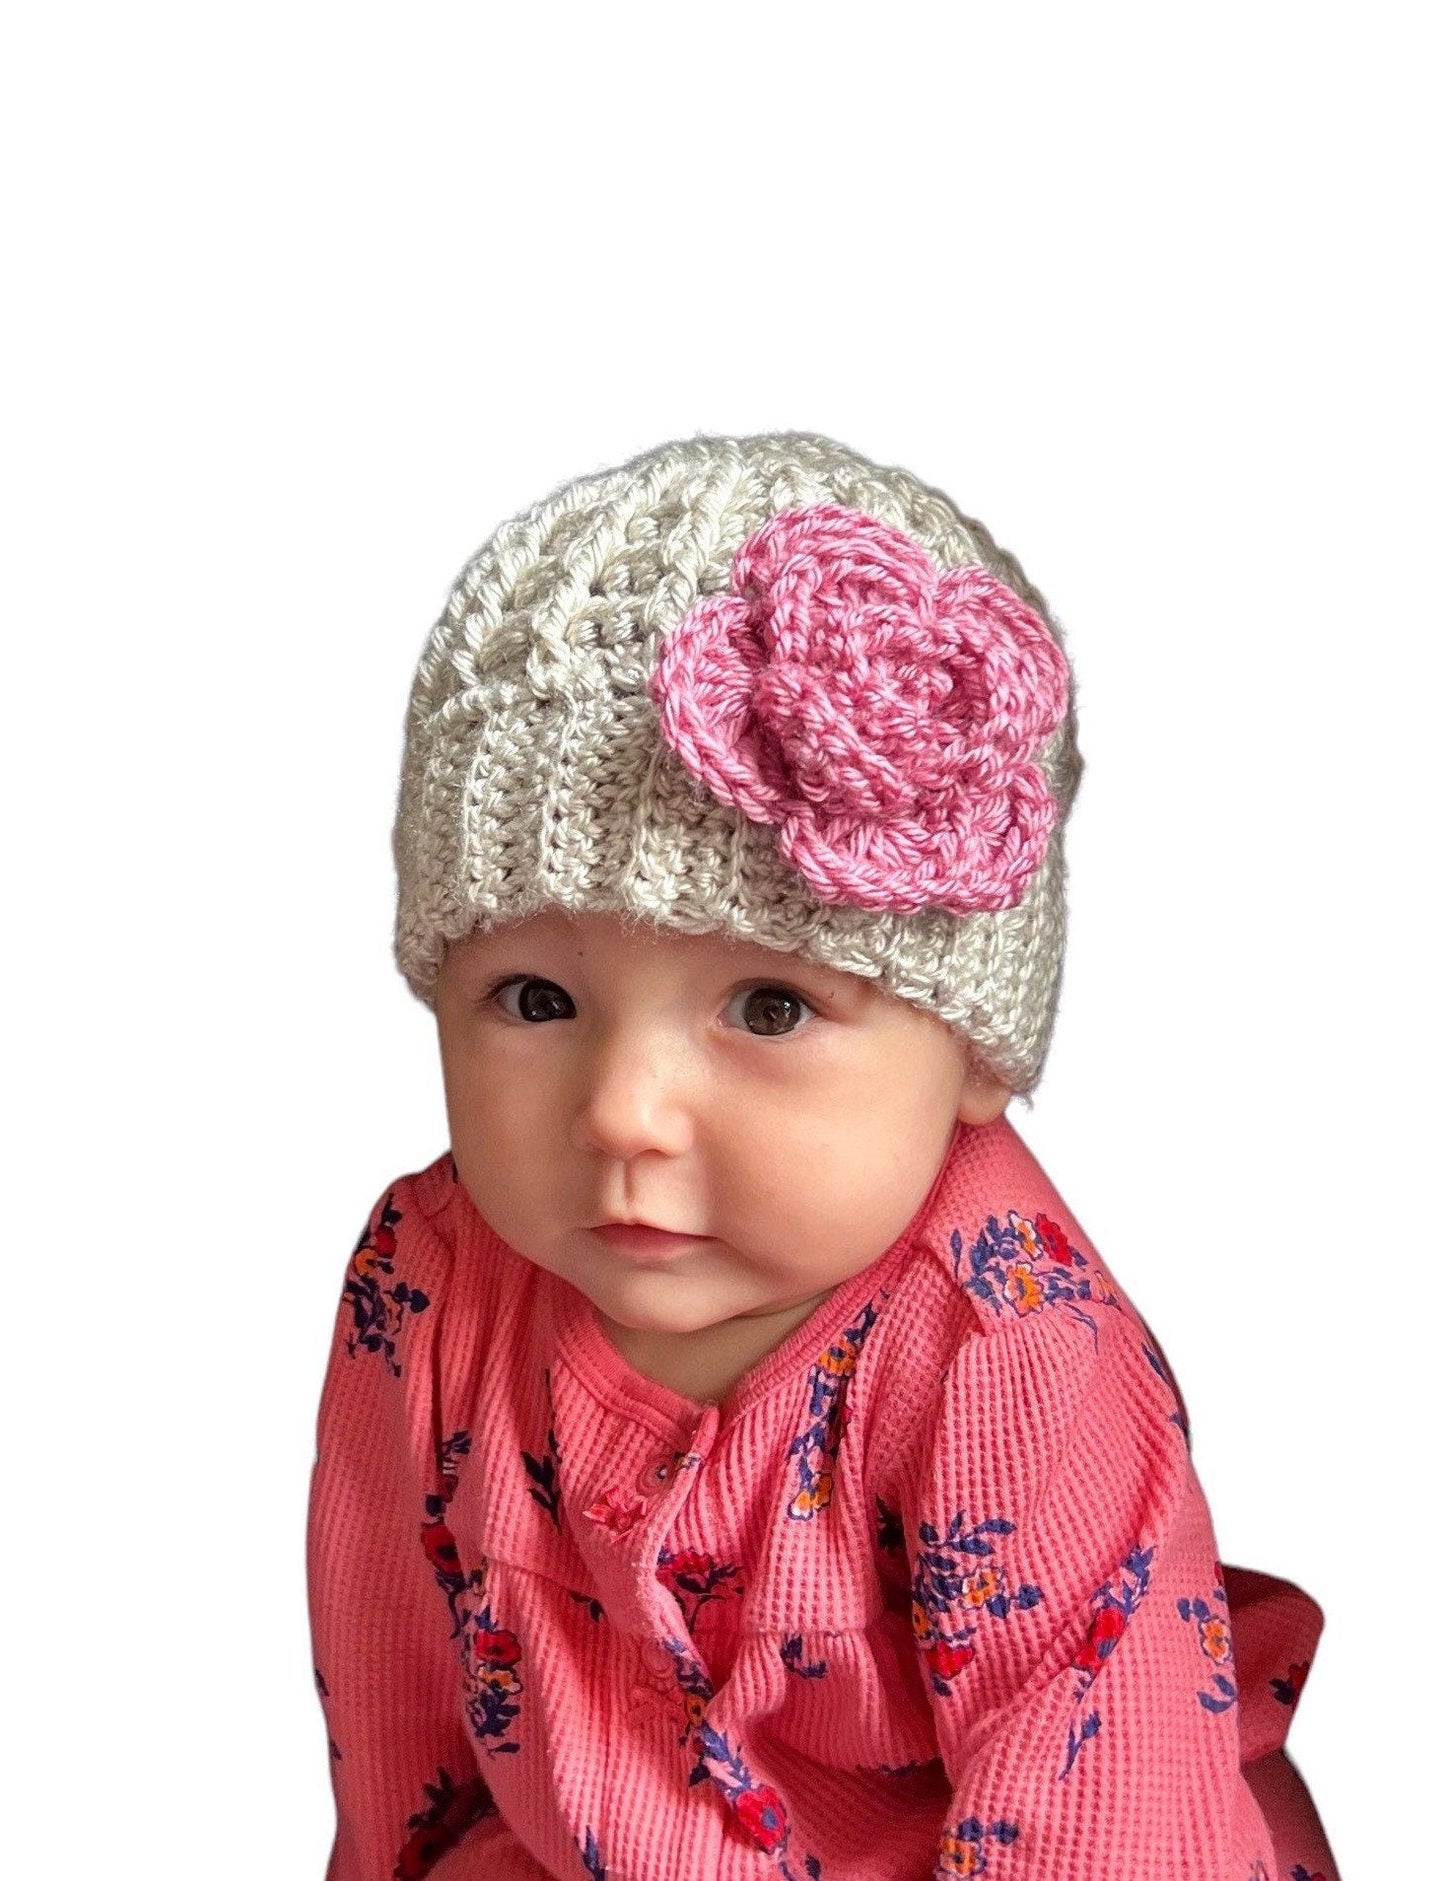 Handmade crochet hat for a baby girl, silver/light gray hat with pink crochet flower, hat for toddler girl, different sizes available - Lilly Grace Sparkle Boutique